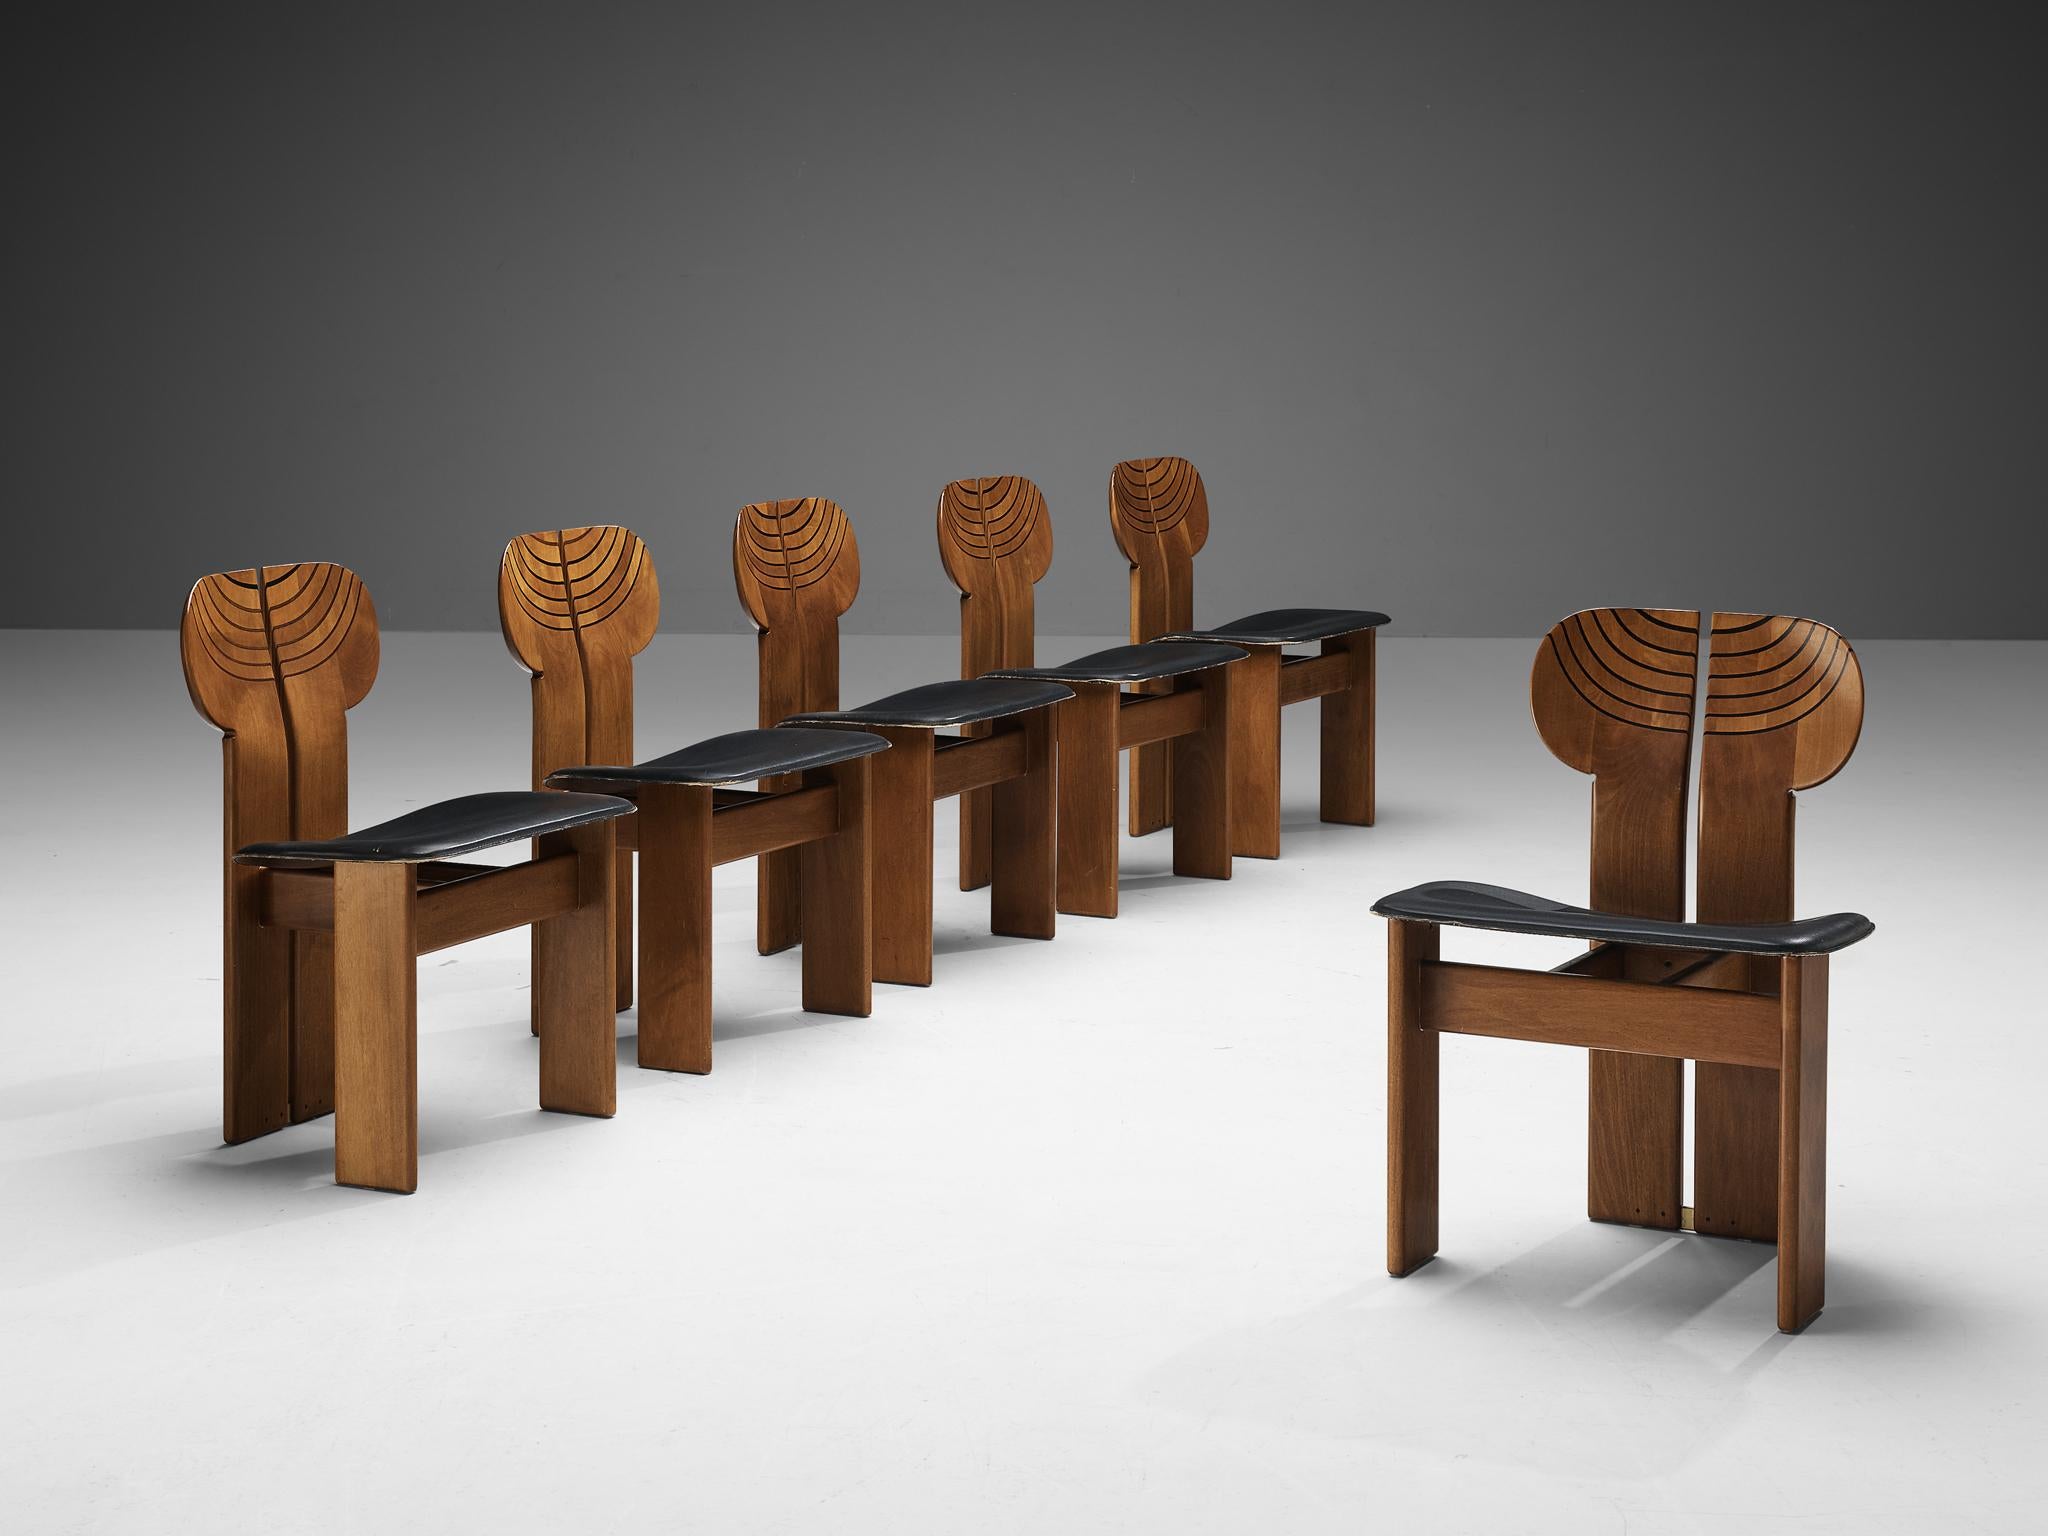 Afra & Tobia Scarpa for Maxalto, set of six dining chairs model 'Africa', black leather, in walnut, ebony and brass, Italy, 1975.

This set of 'Africa' chairs explicitly sculptural grand chairs is designed by Afra & Tobia Scarpa. They are part of